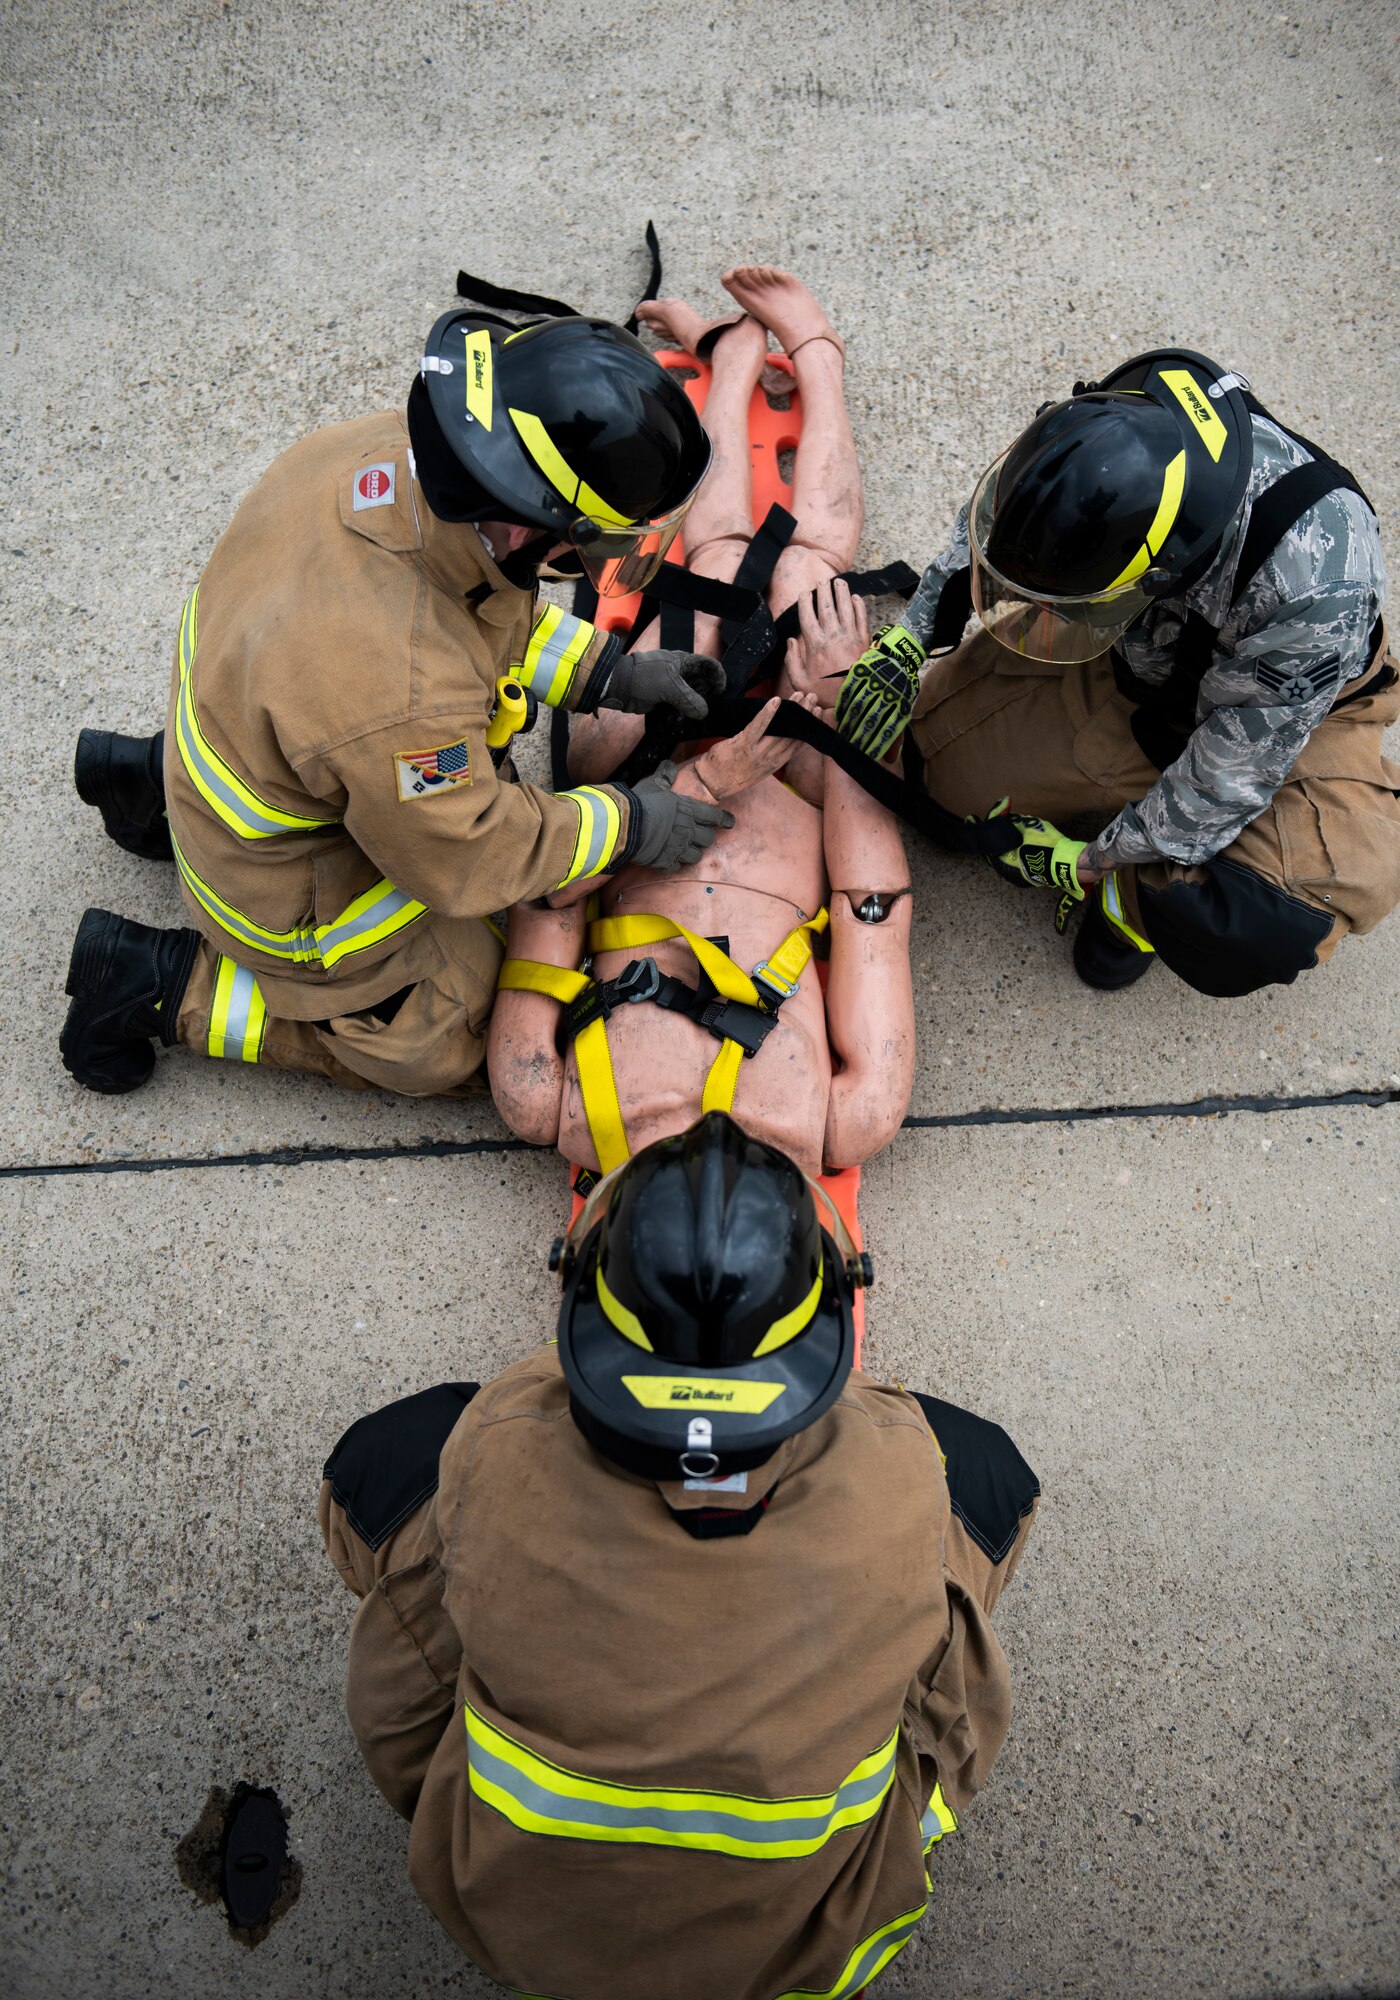 Fire fighters from the 8th Civil Engineer Squadron secure a mannequin simulating a fall victim at Kunsan Air Base, Republic of Korea, March 26, 2019. The fire department responded to the call in minutes to be on scene and rescue the victim as quickly and safely as possible. (U.S. Air Force phot by Senior Airman Stefan Alvarez)